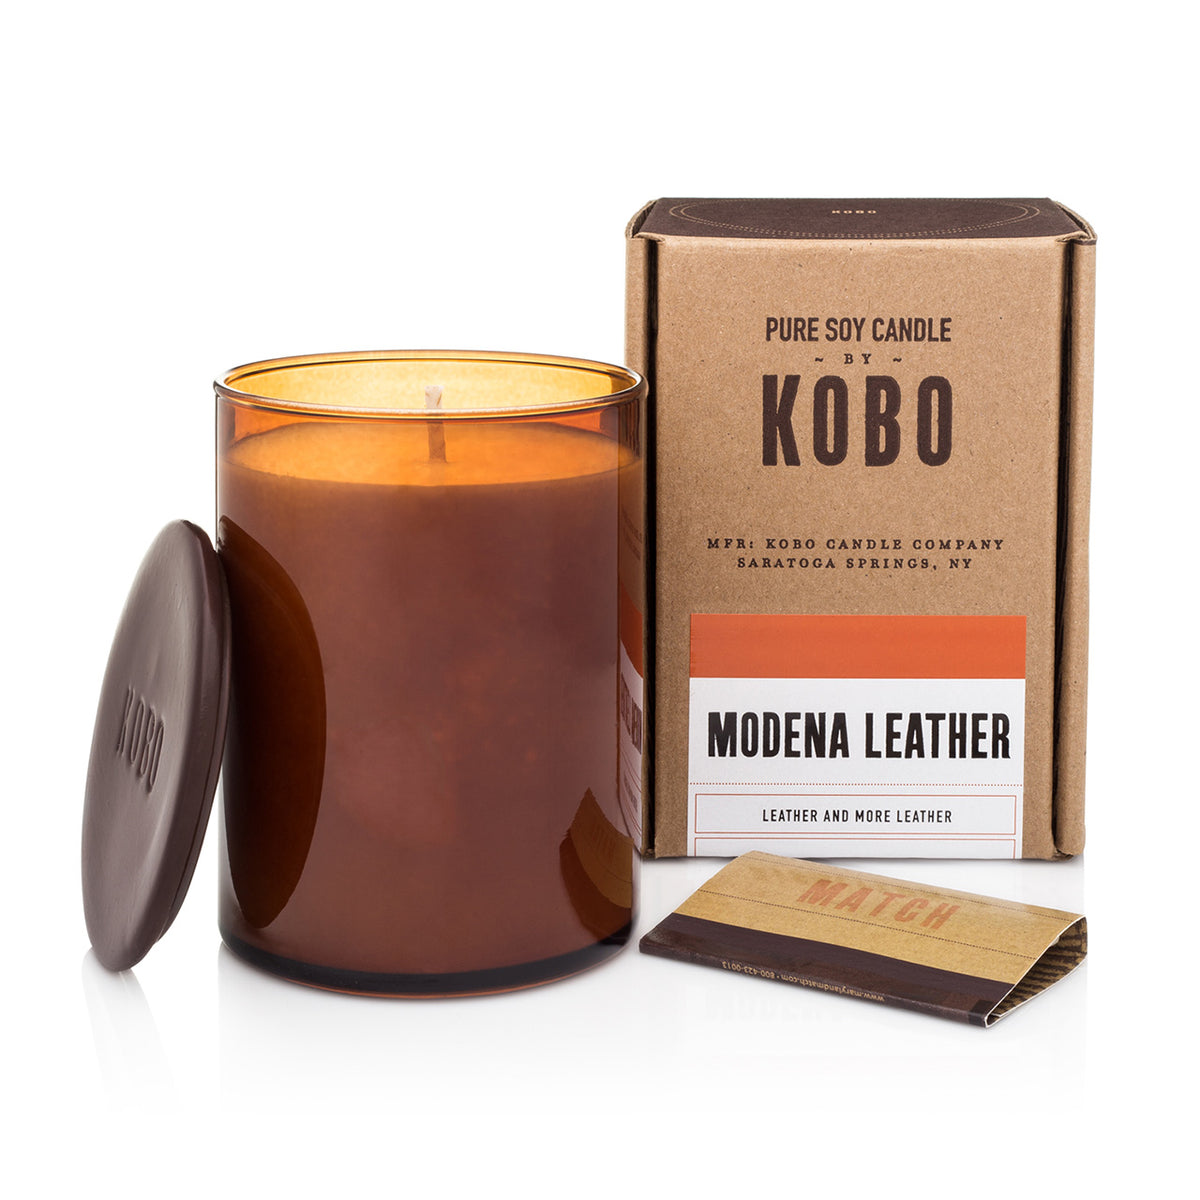 Kobo Large Pure Soy Candle in an amber glass jar with ceramic lid, matches and kraft box. Modena Leather scent